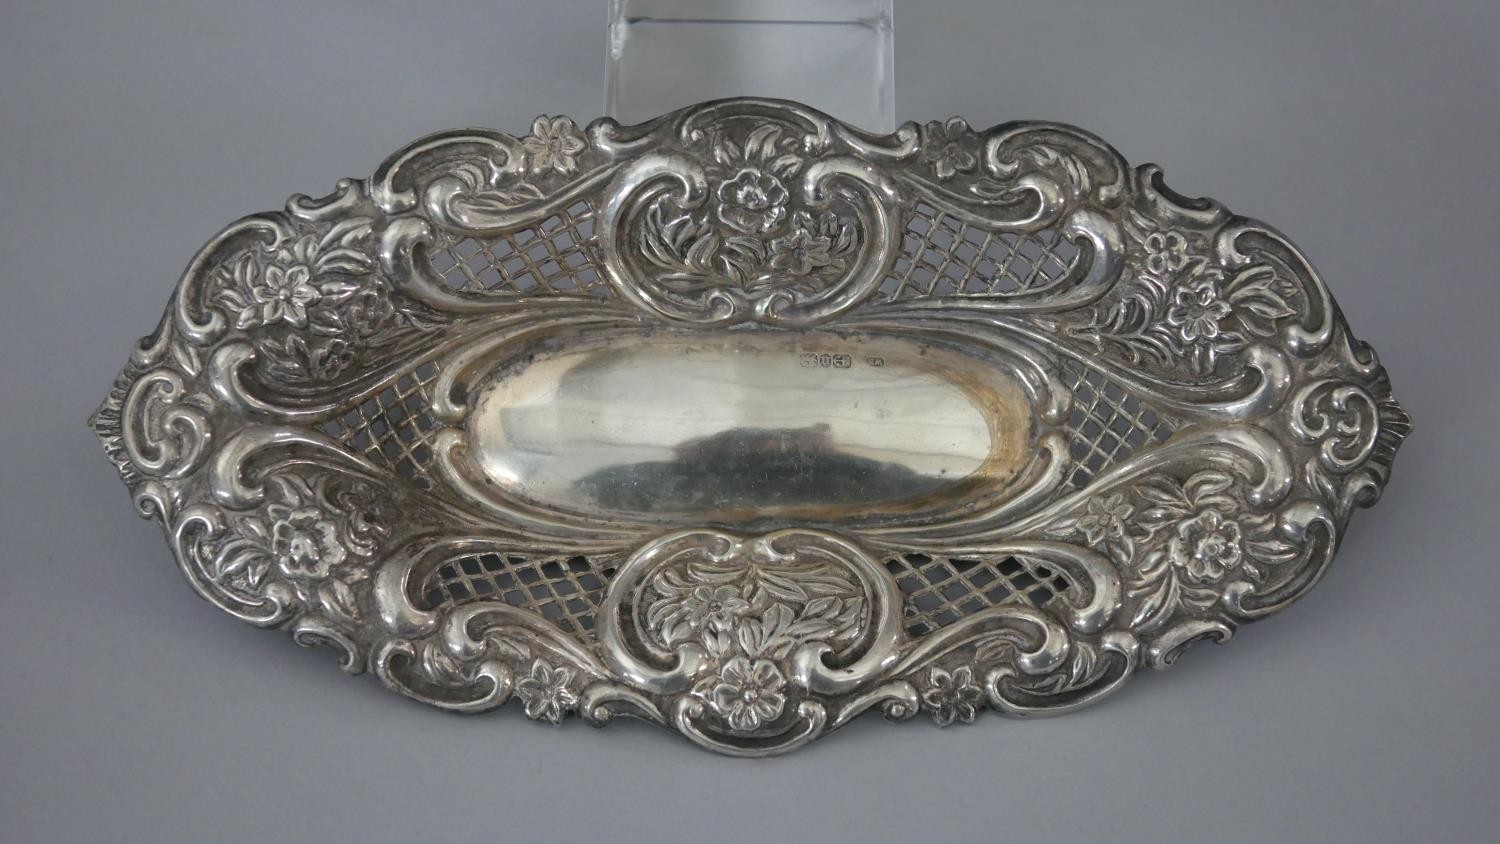 A Victorian pierced repousse design silver pin dish with floral and scrolling motifs and pierced - Image 2 of 5